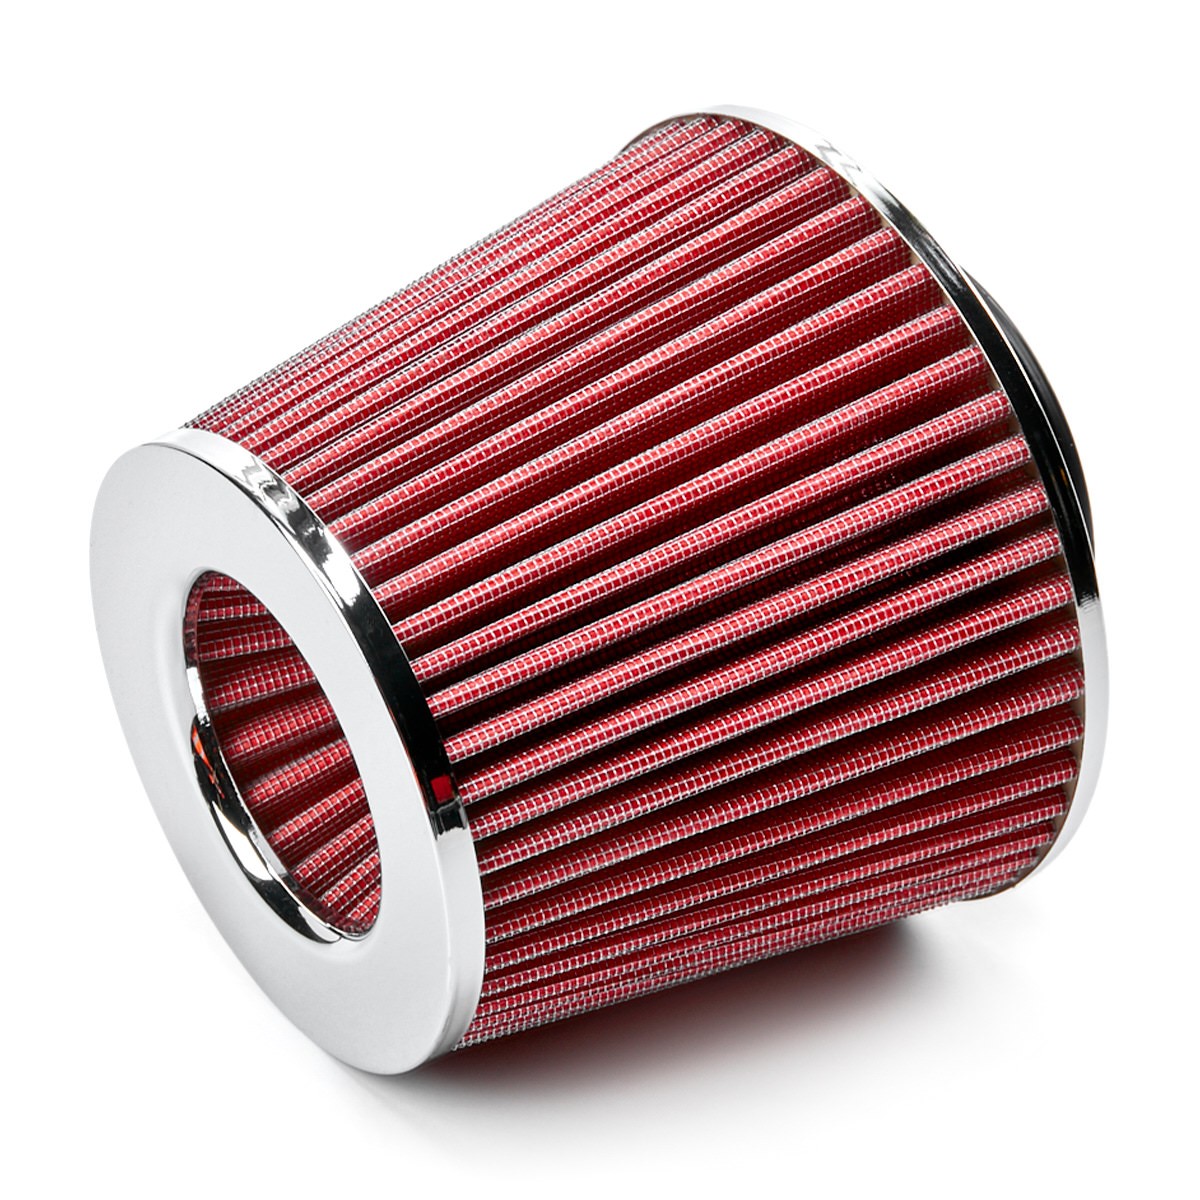 AMiO AF-Chrome Sports Air Filter 55, 60, 65, 70, 76mm 01282 HONDA Moped Maxi scooters